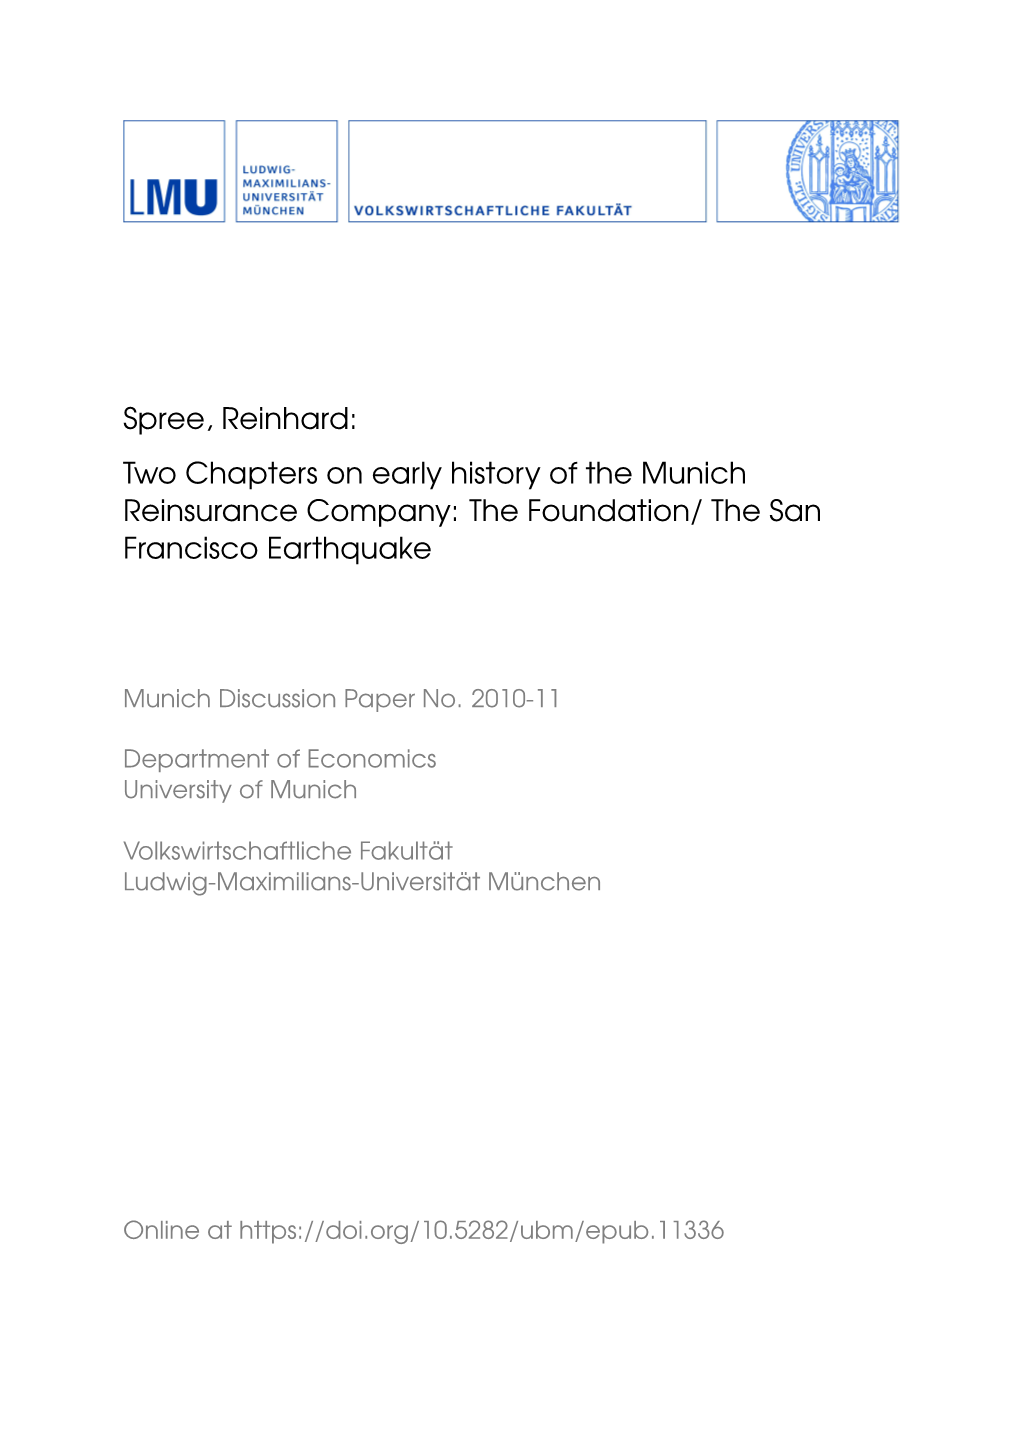 Two Chapters on Early History of the Munich Reinsurance Company: the Foundation/ the San Francisco Earthquake